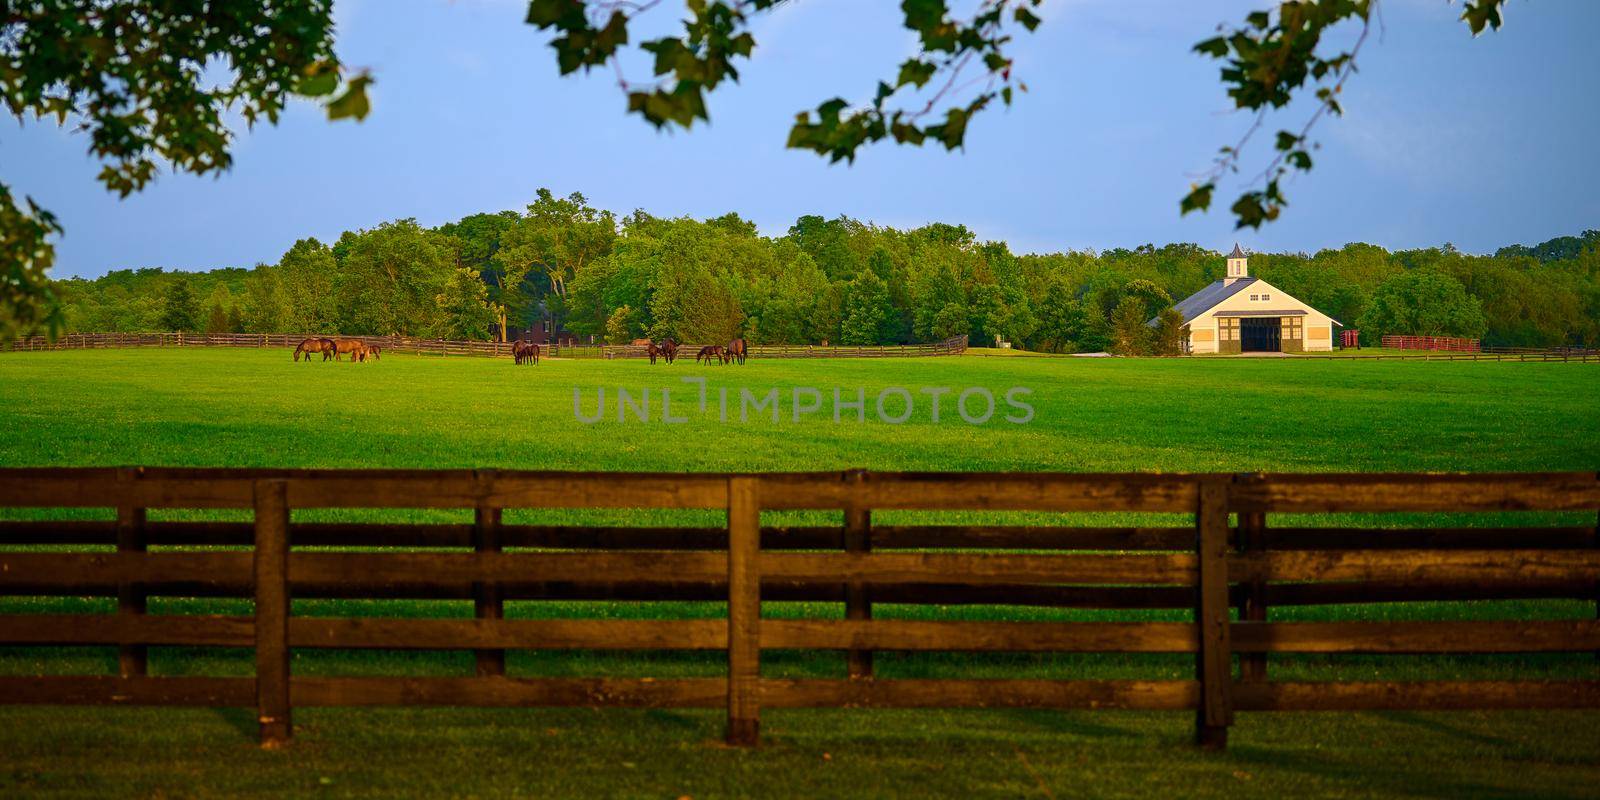 Thoroughbred horses grazing in a field with horse barn. by patrickstock